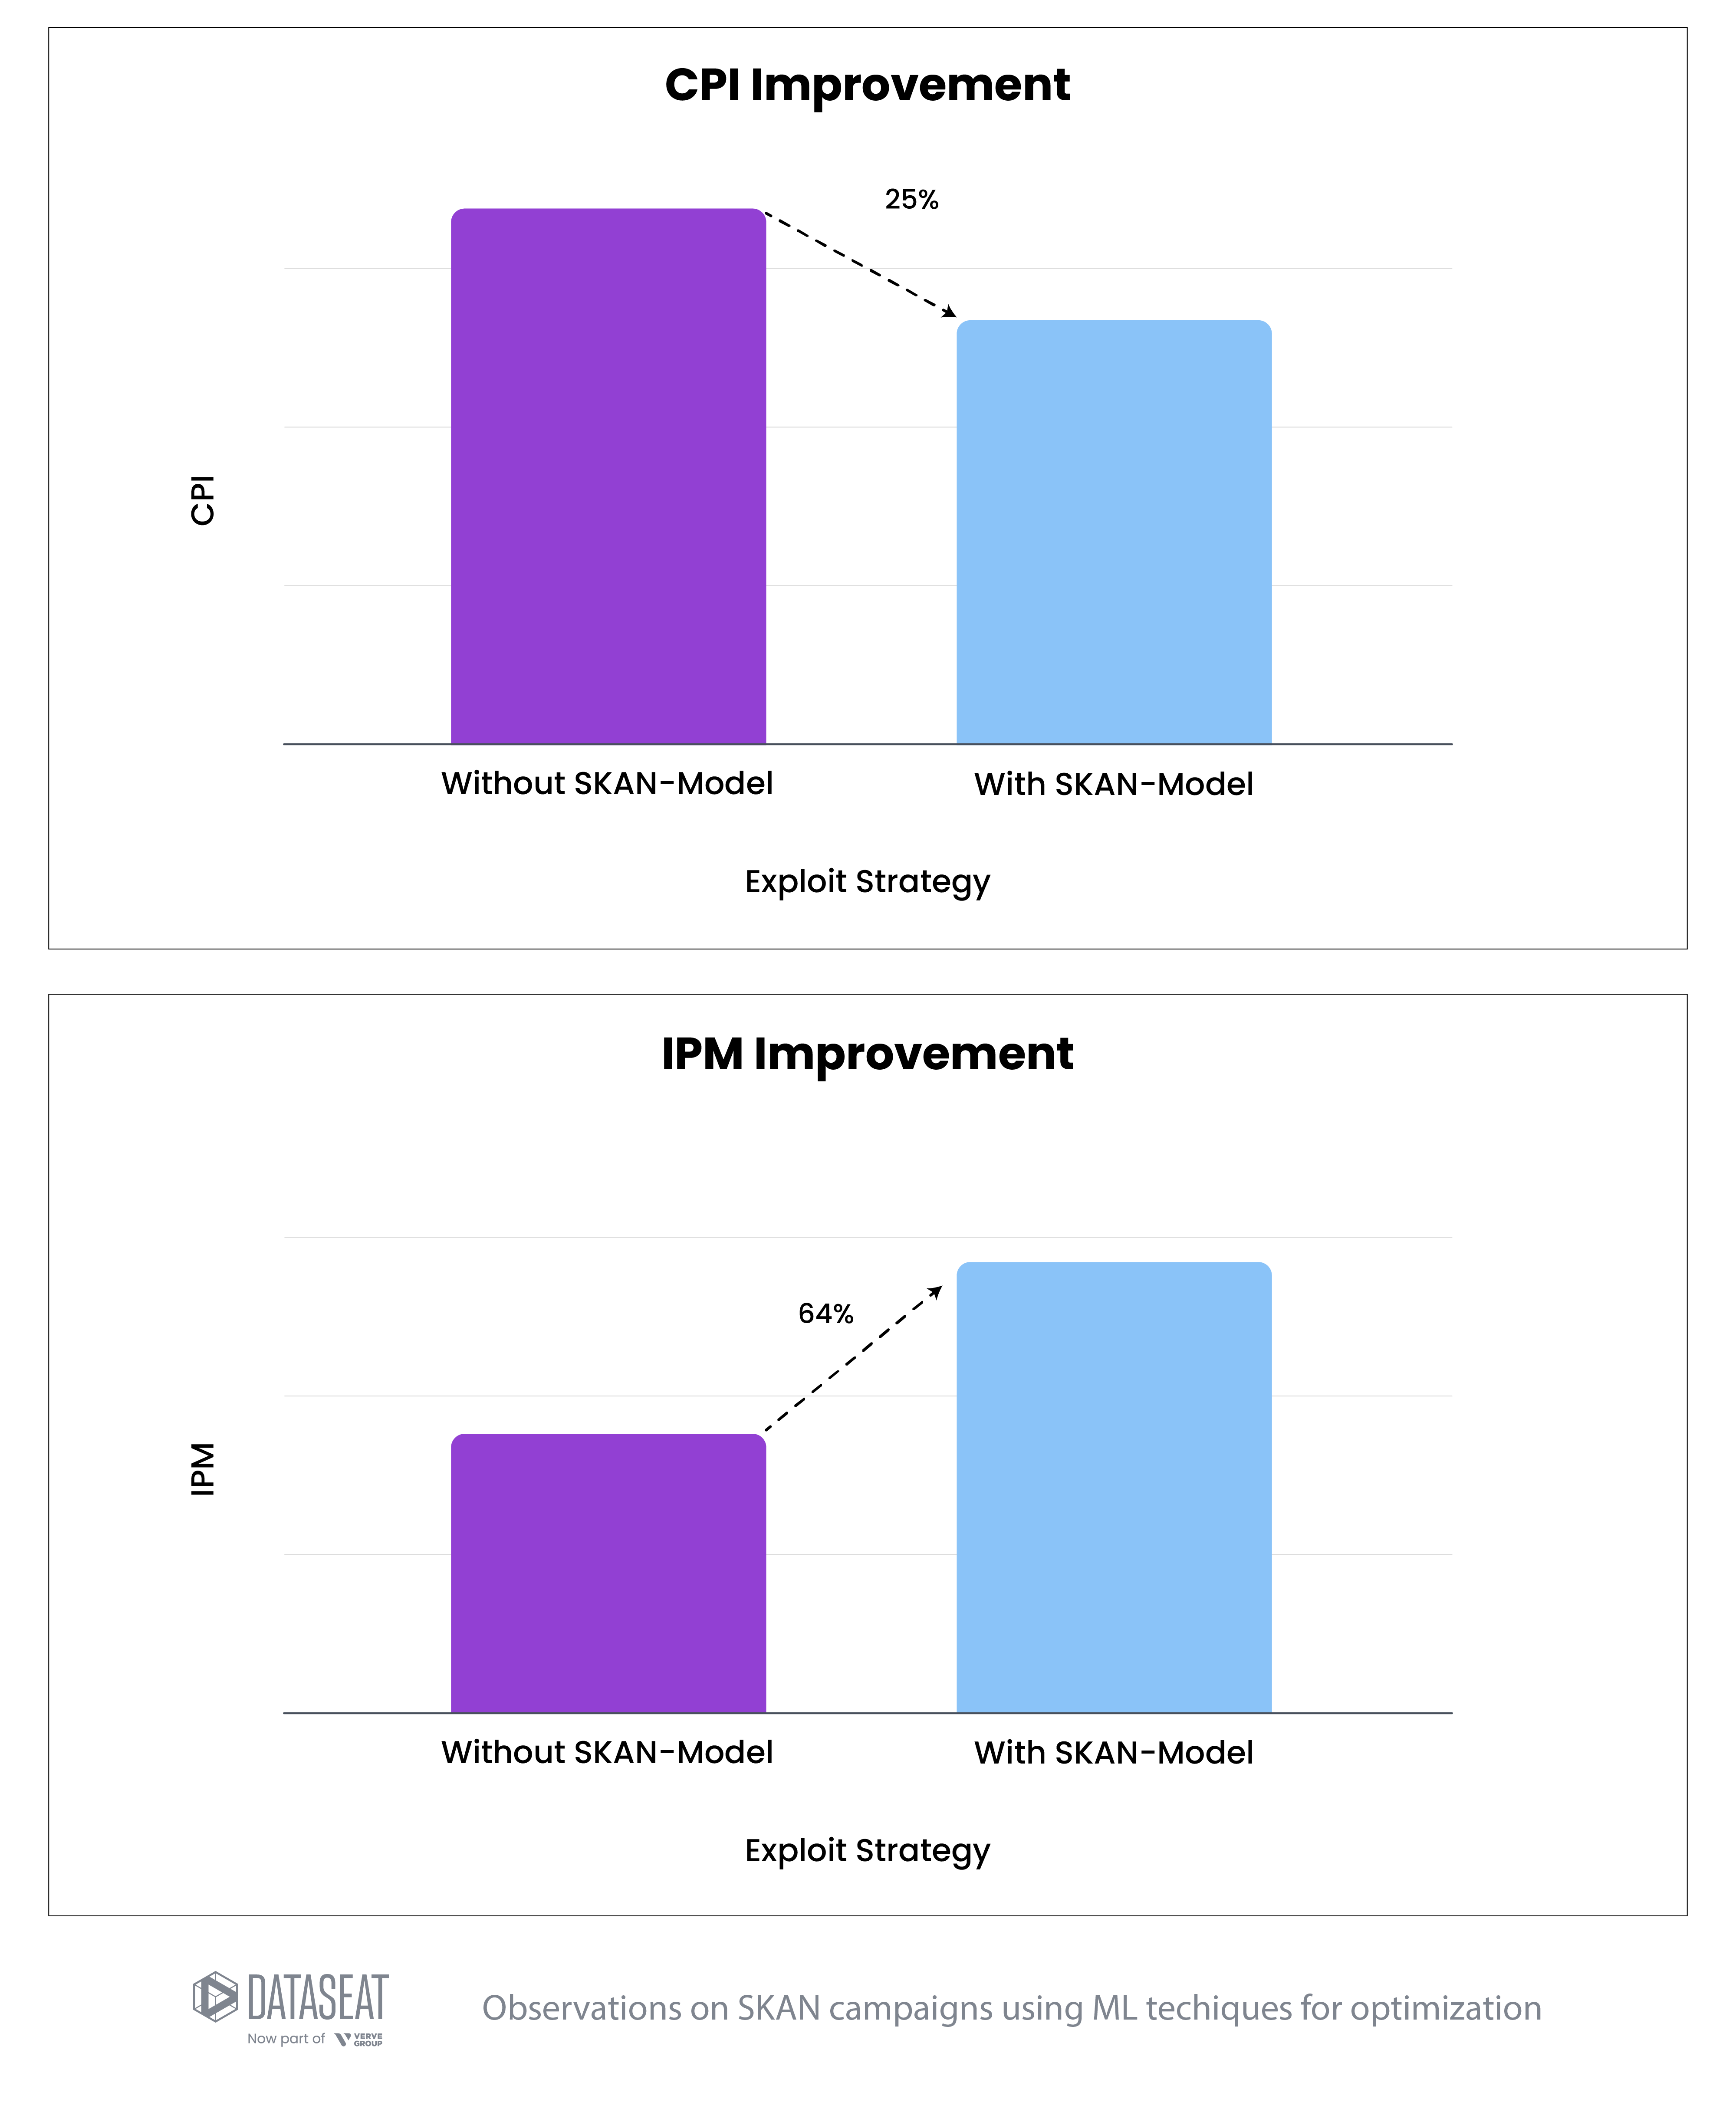 ML+SKAN-optimized campaigns: CPI and IPM improvements